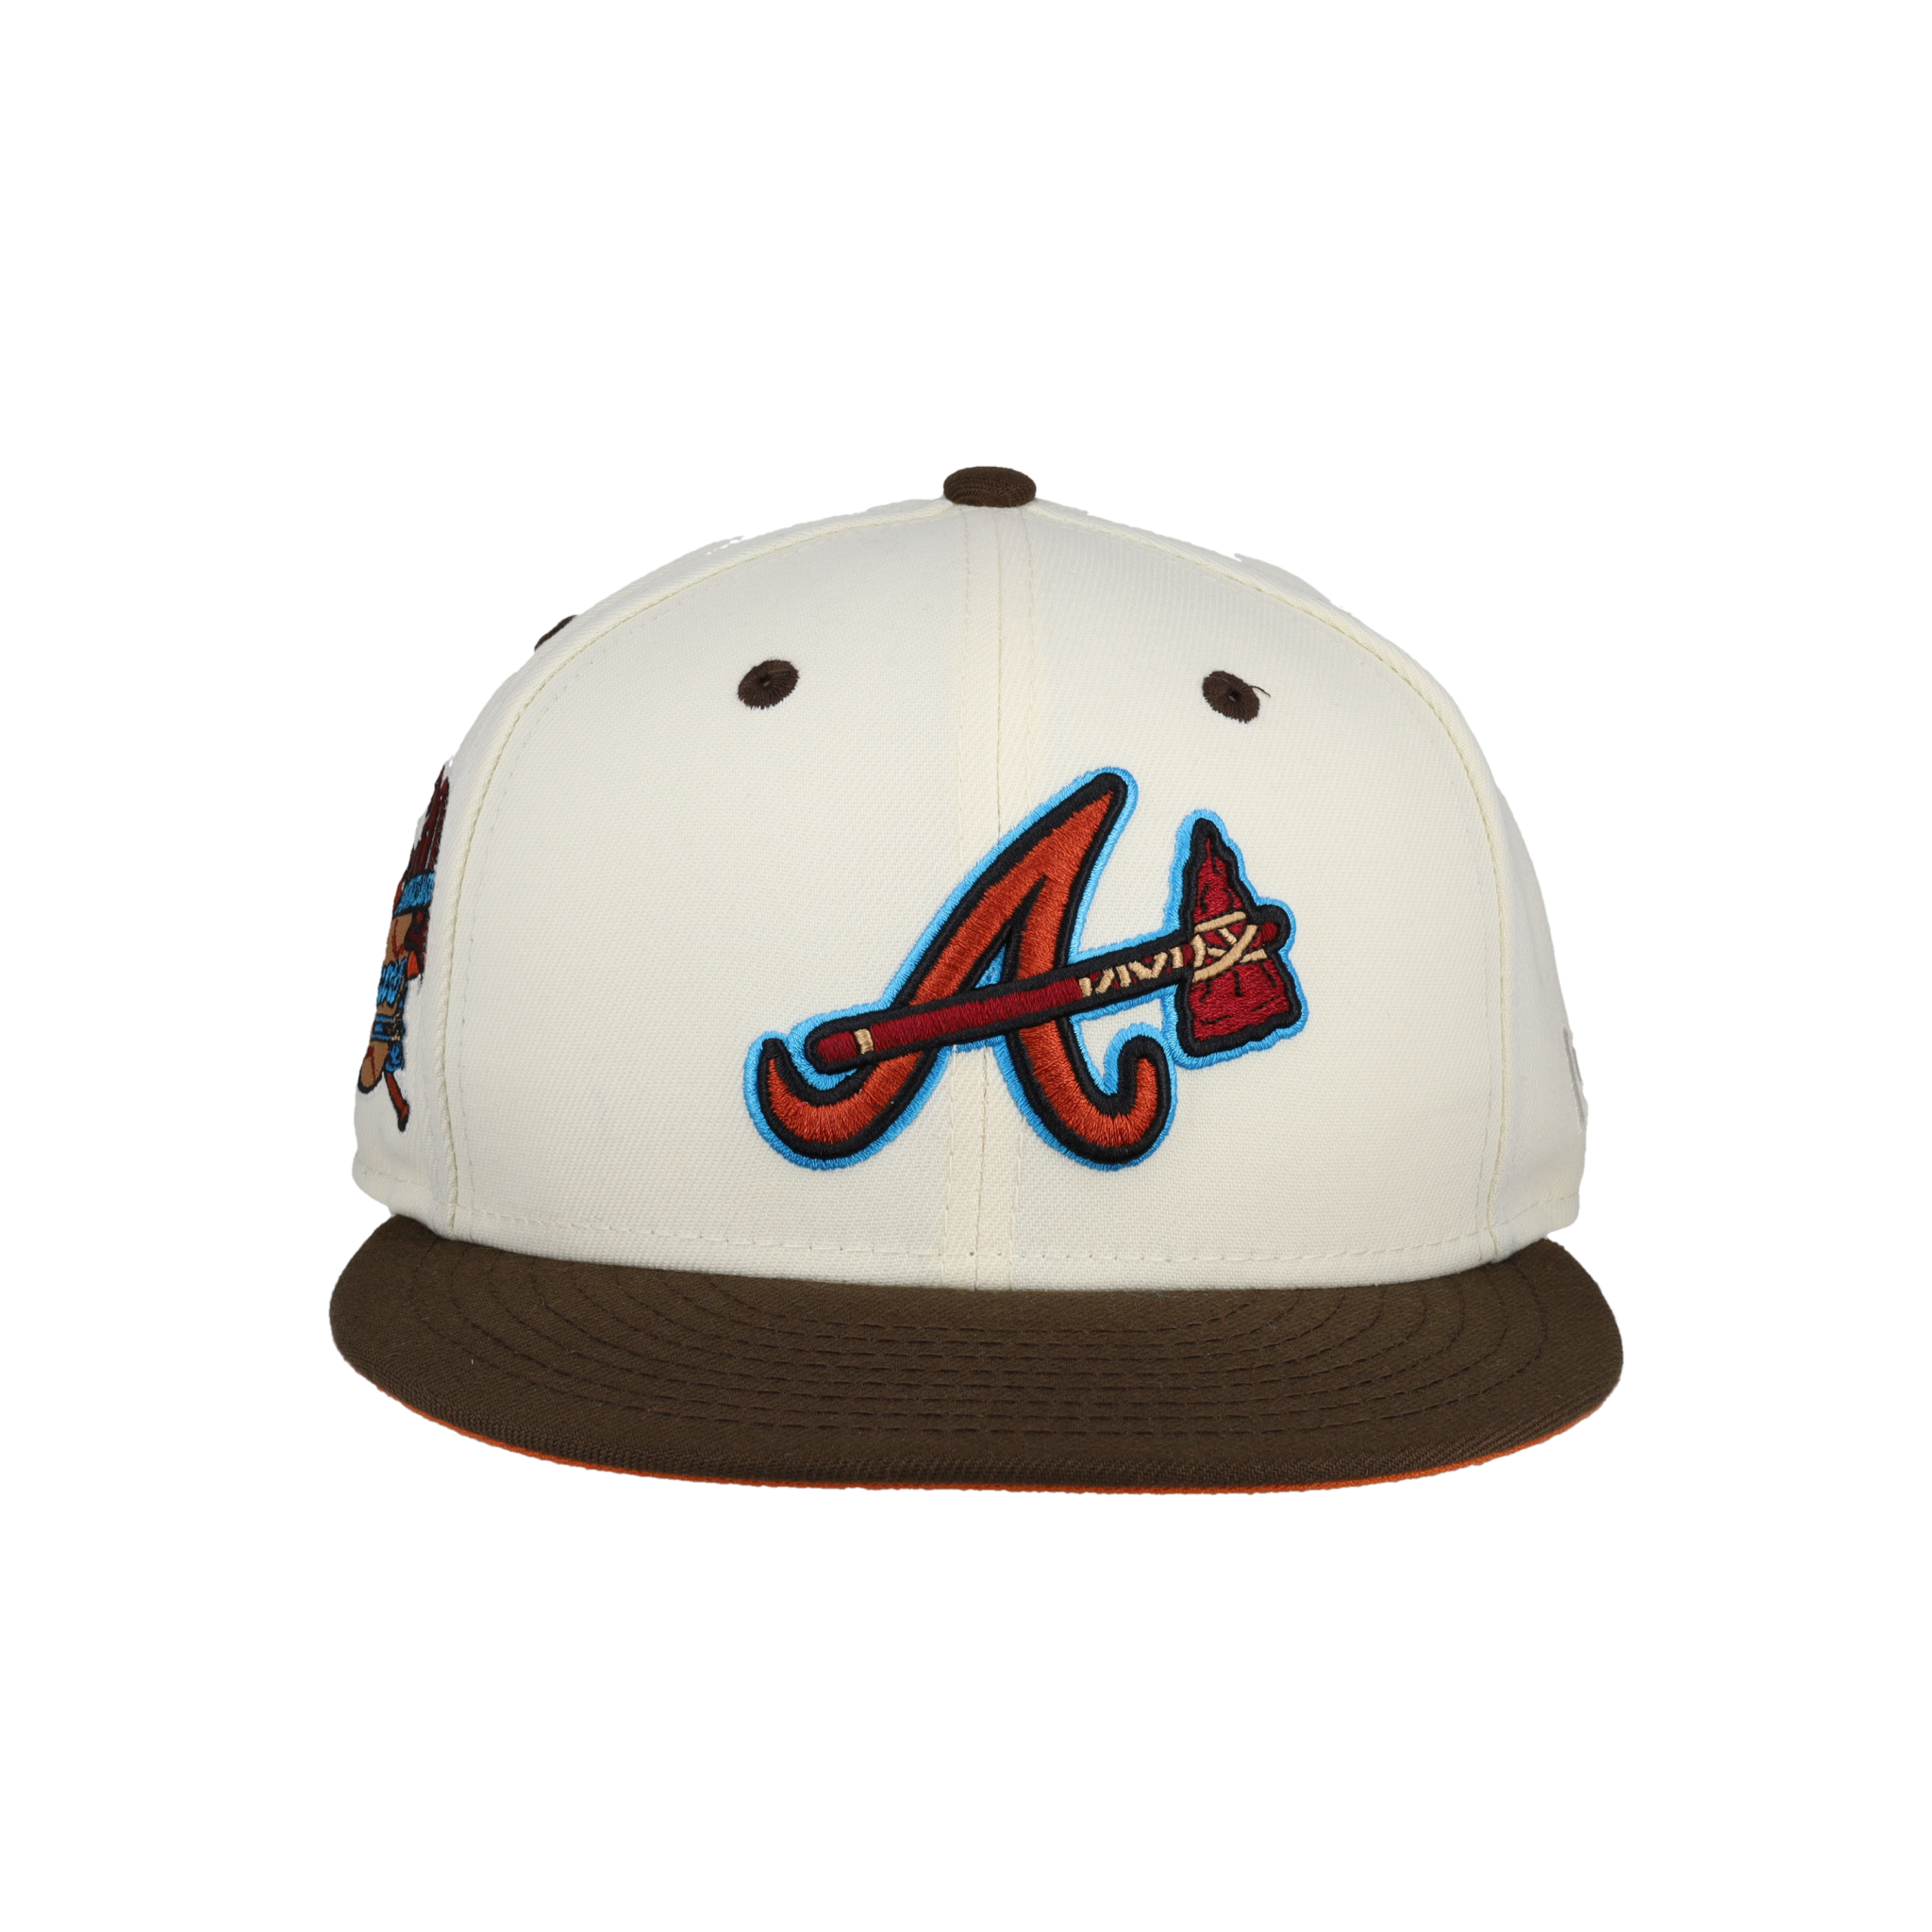 New Era Atlanta Braves World Series 1995 Purple Edition 59Fifty Fitted Cap, EXCLUSIVE HATS, CAPS